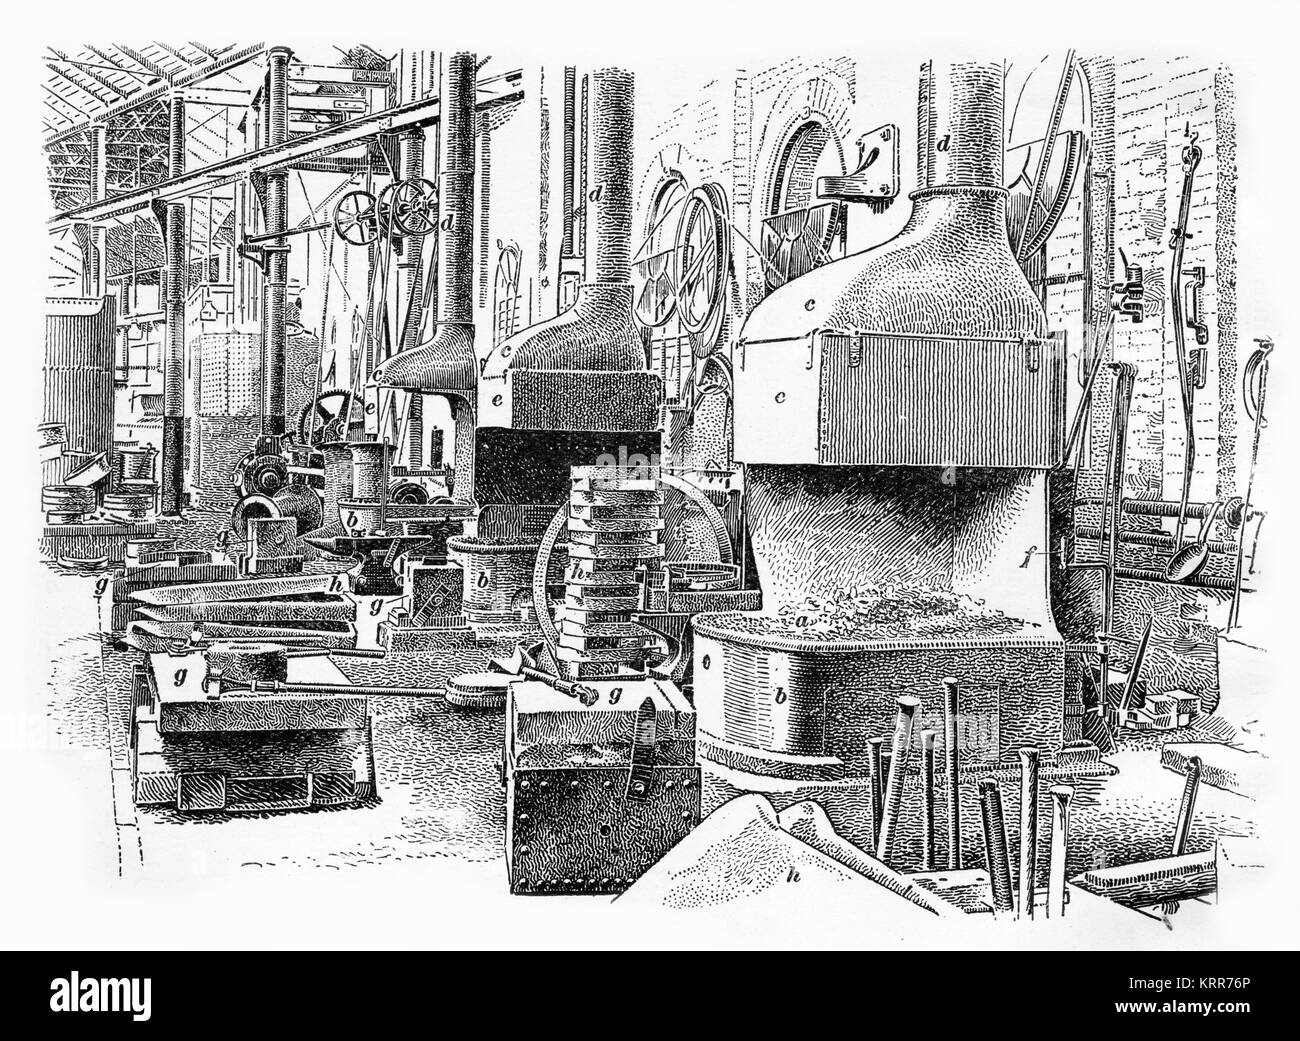 Engraving of a blacksmith's shop toward the end of the Industrial Revolution in England. From an engraving made in the 1890s. Stock Photo